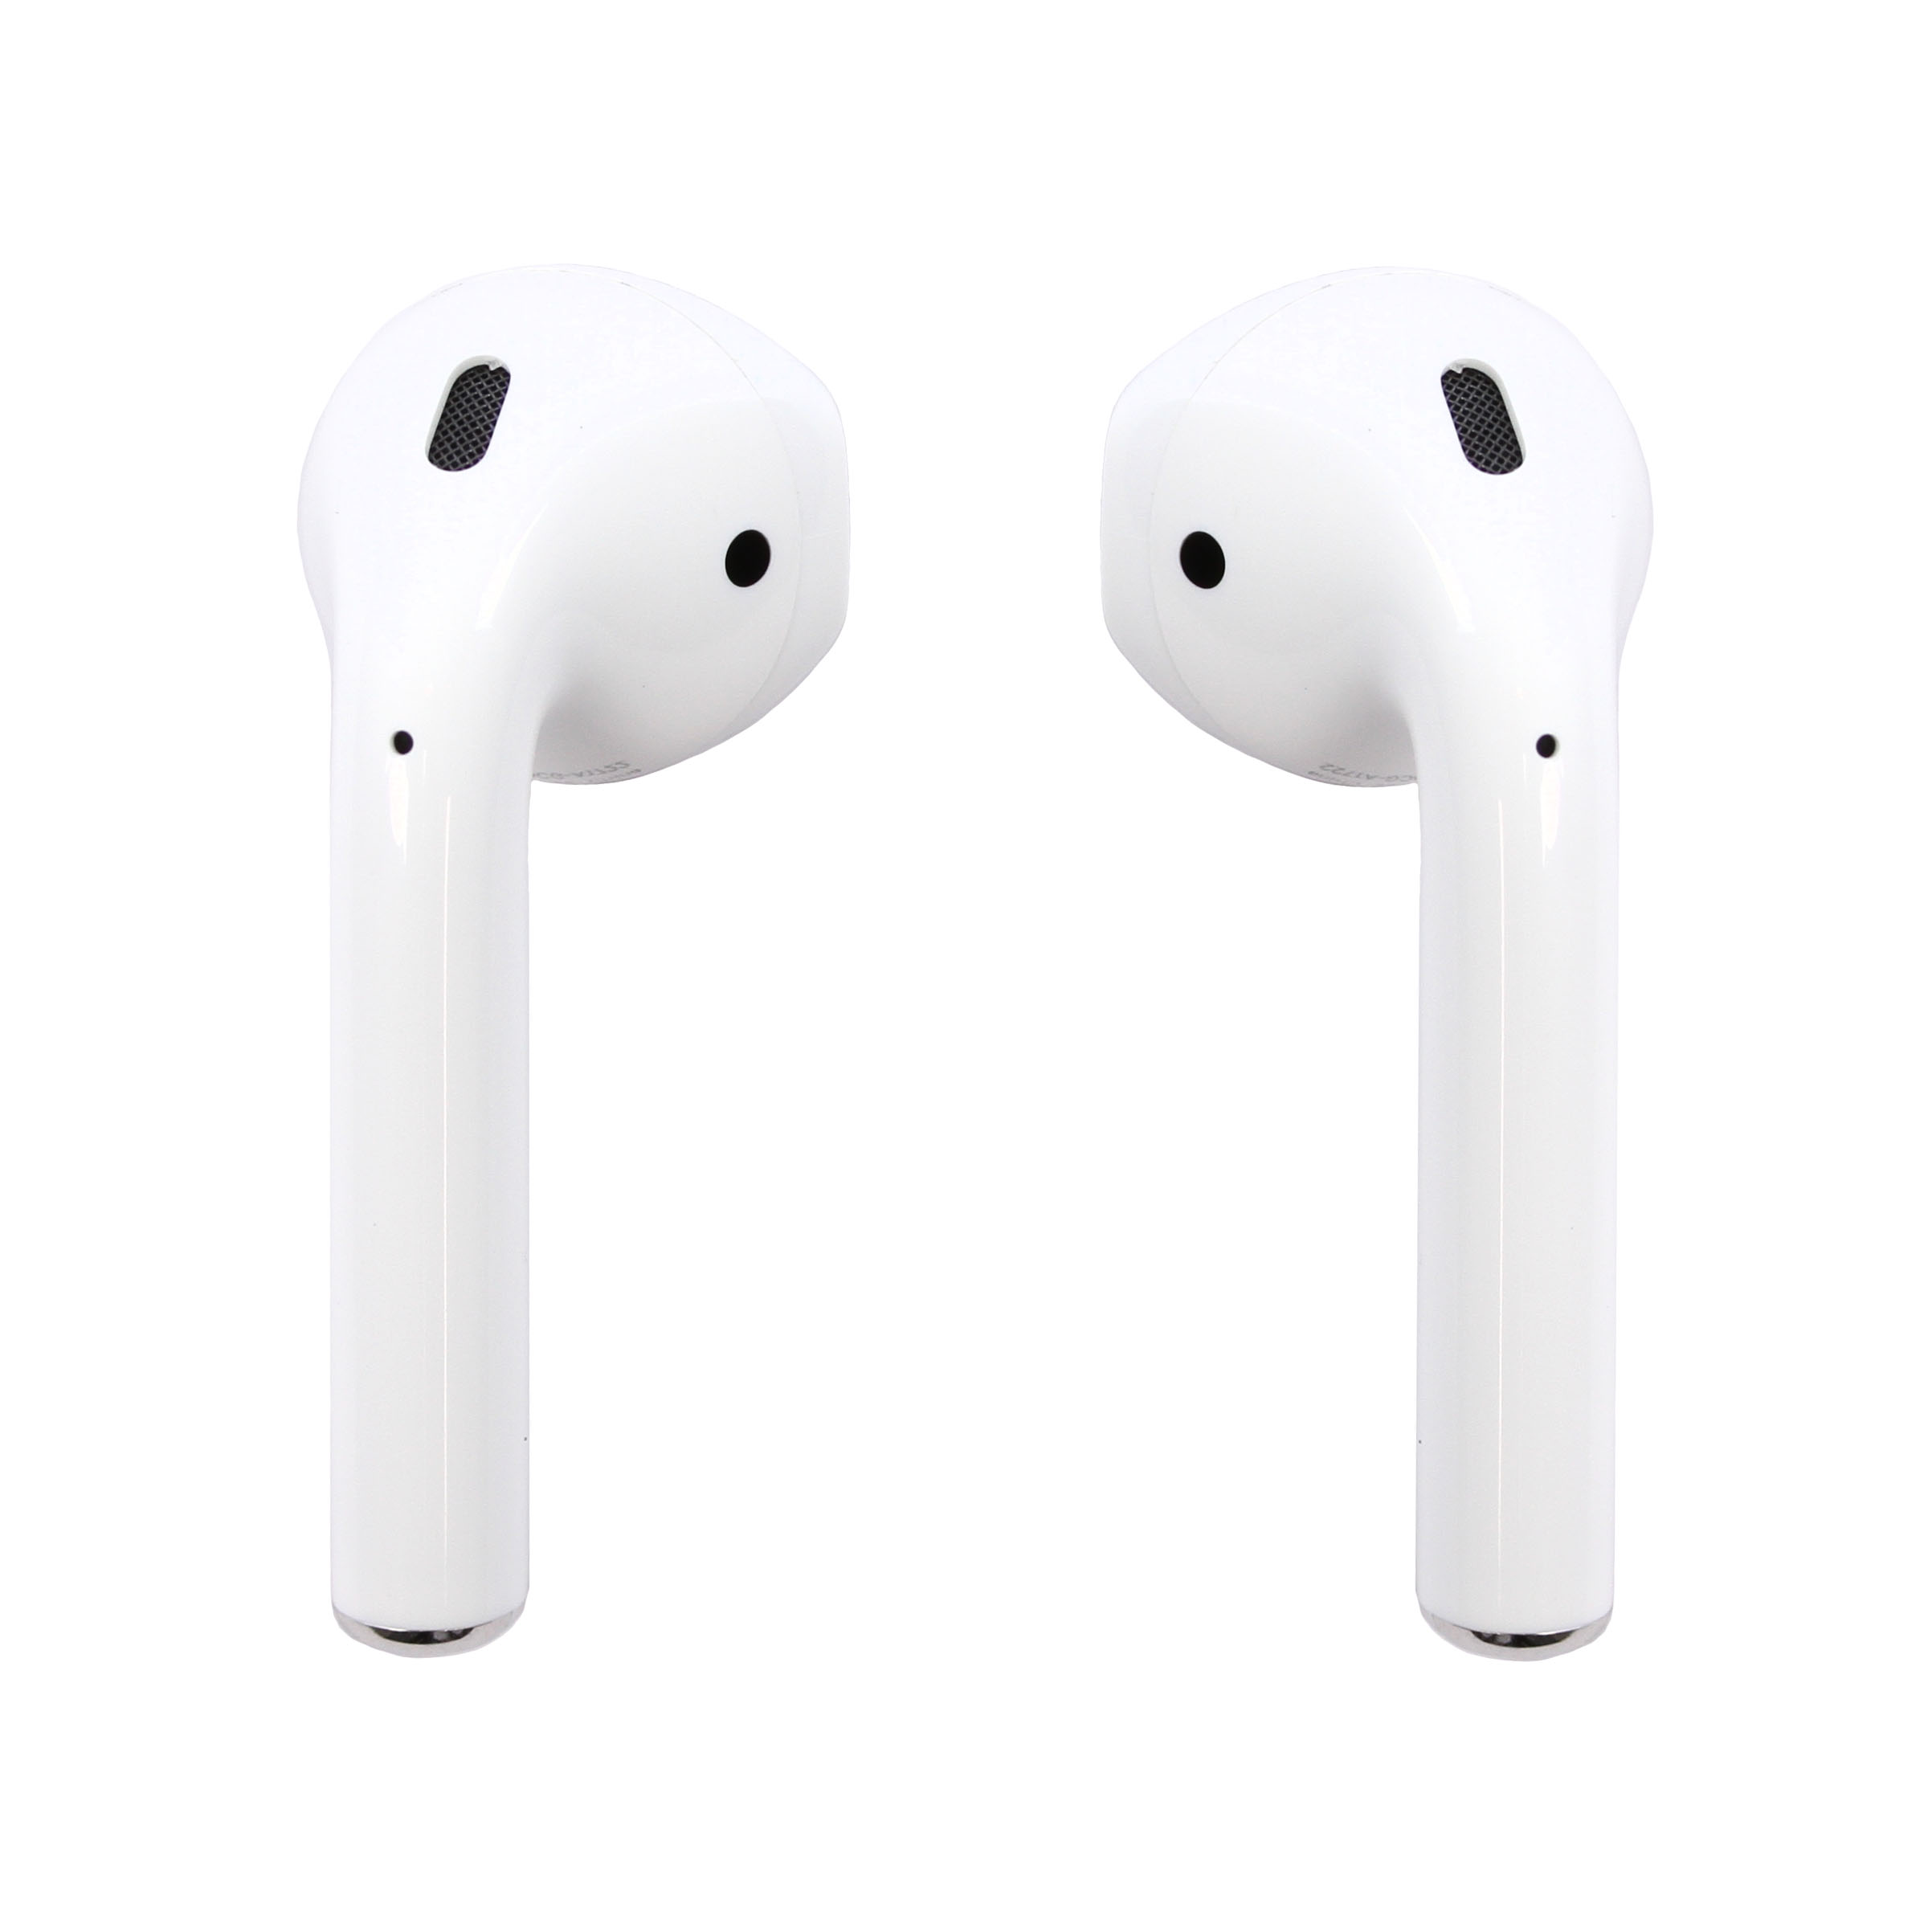 (Used) Apple AirPods Bluetooth Wireless Earphones w/ MFI Cable - White - image 2 of 3